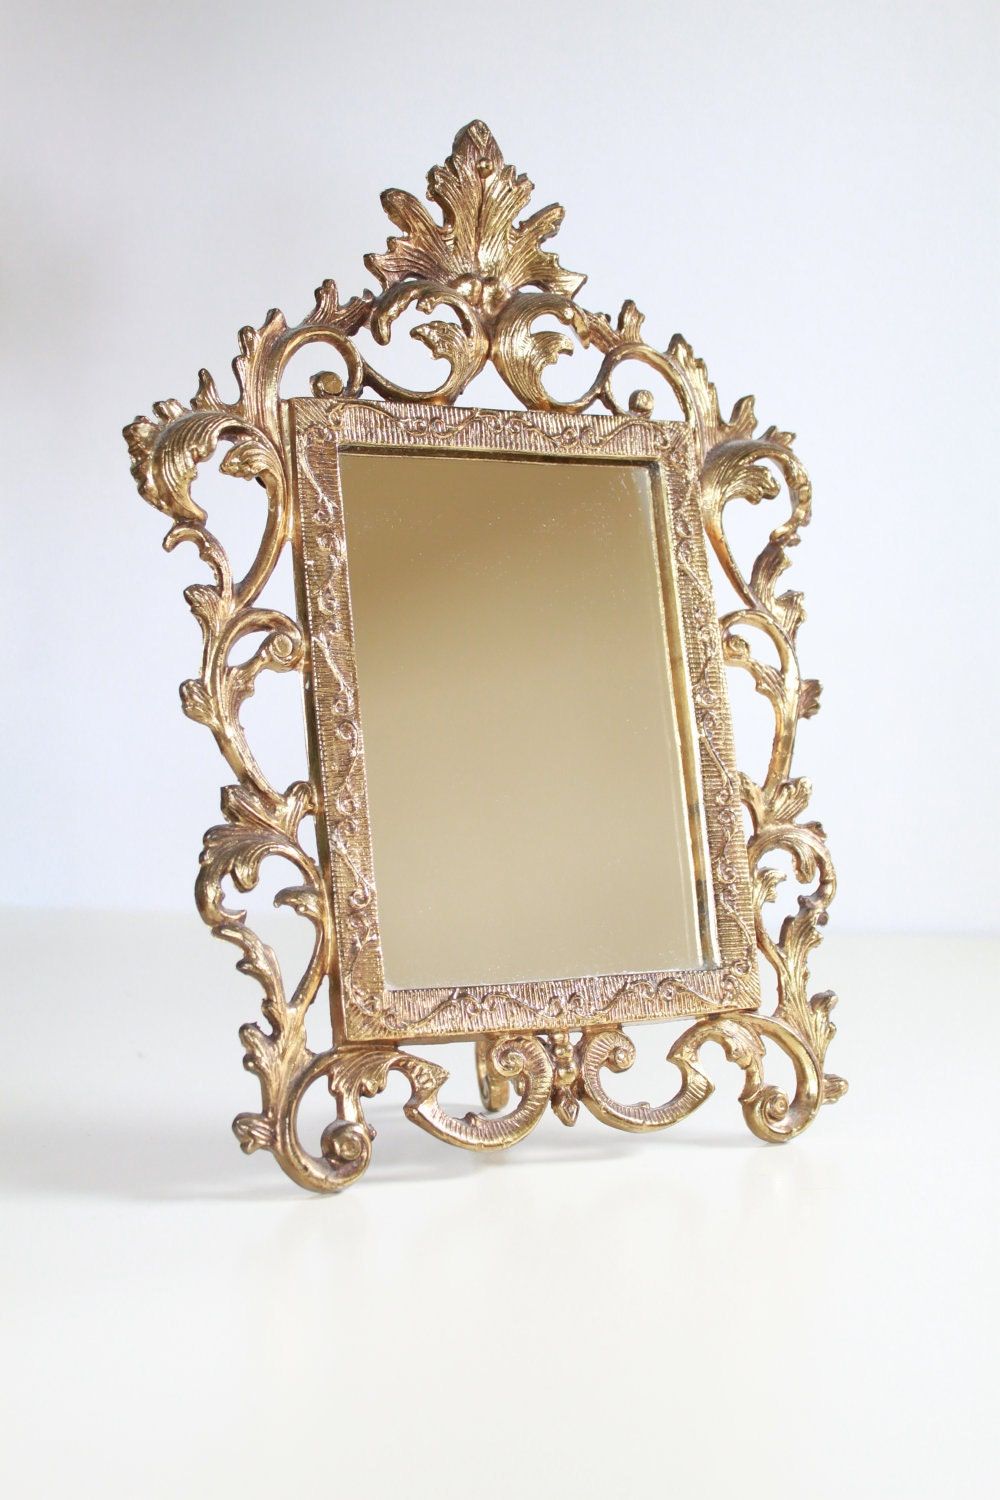 Vintage Golden Vanity Mirror Stand Hollywood Regency Wall Inside Antique Iron Standing Mirrors (View 3 of 15)